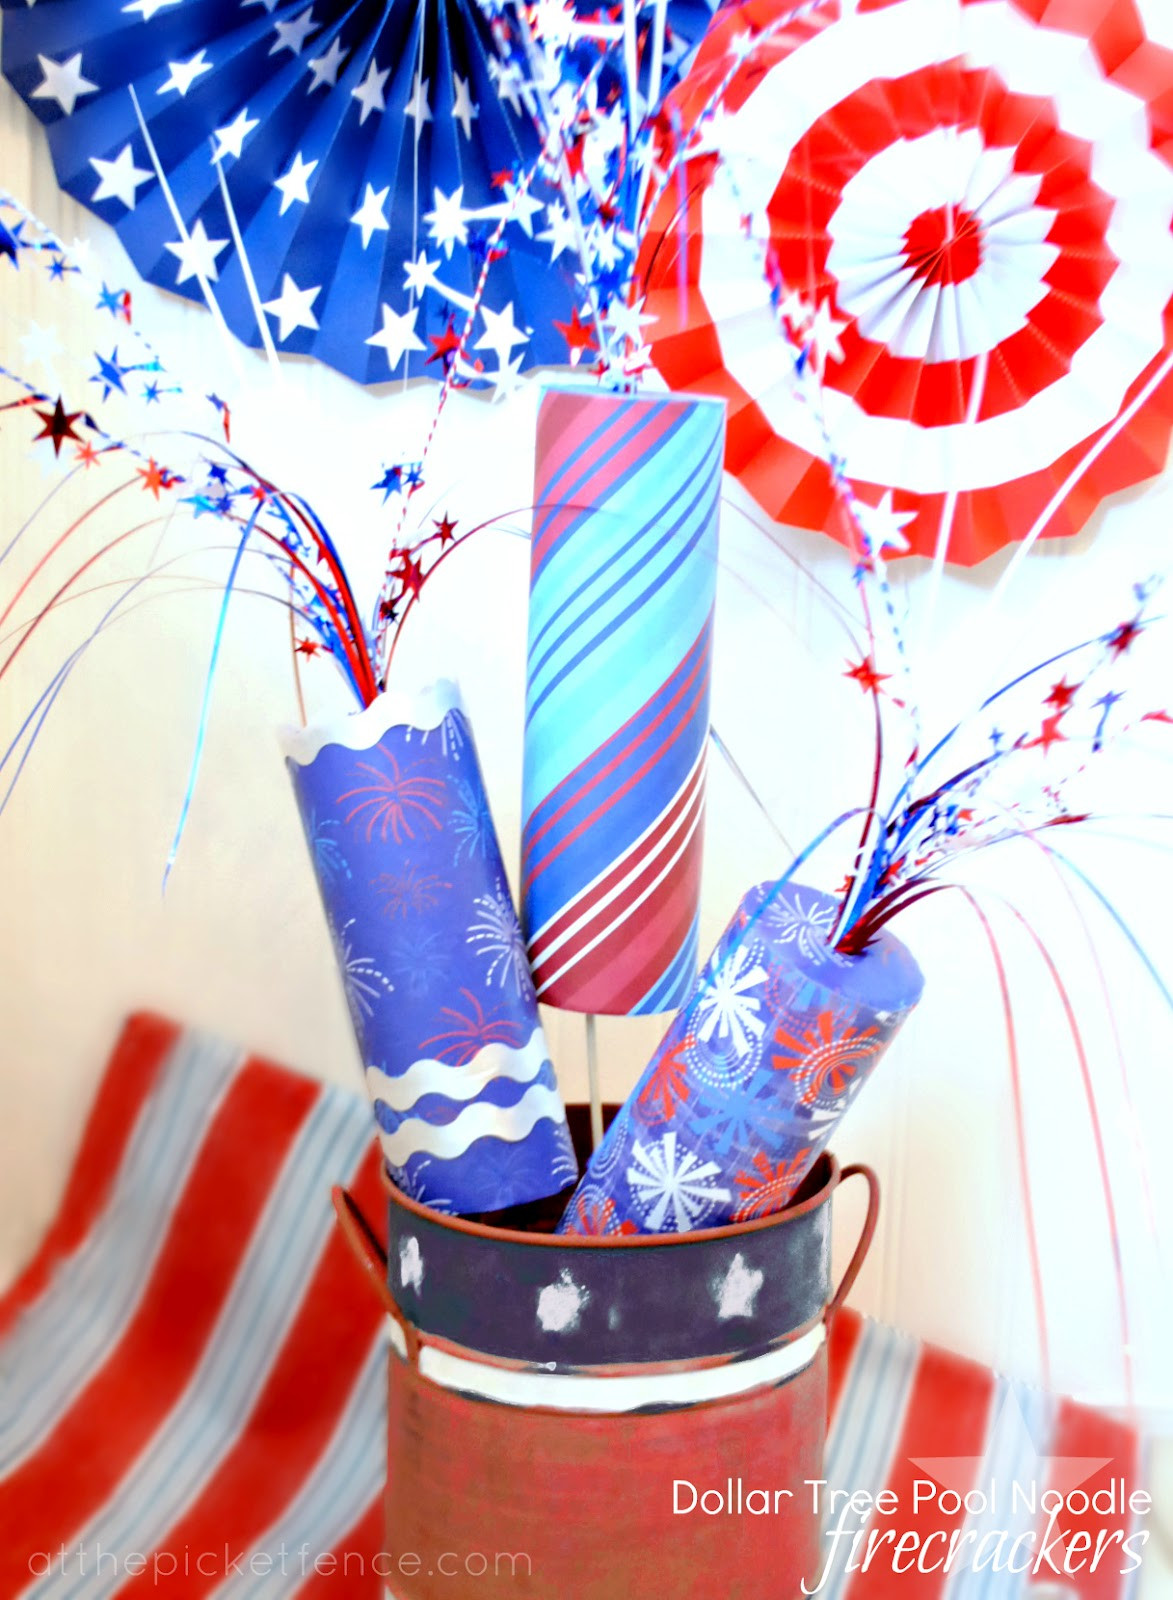 28 Elegant Mod Podge Glitter Vase 2024 free download mod podge glitter vase of dollar tree crafts archives at the picket fence inside 4th of july pool noodle craft patriotic firecrackers dollar tree